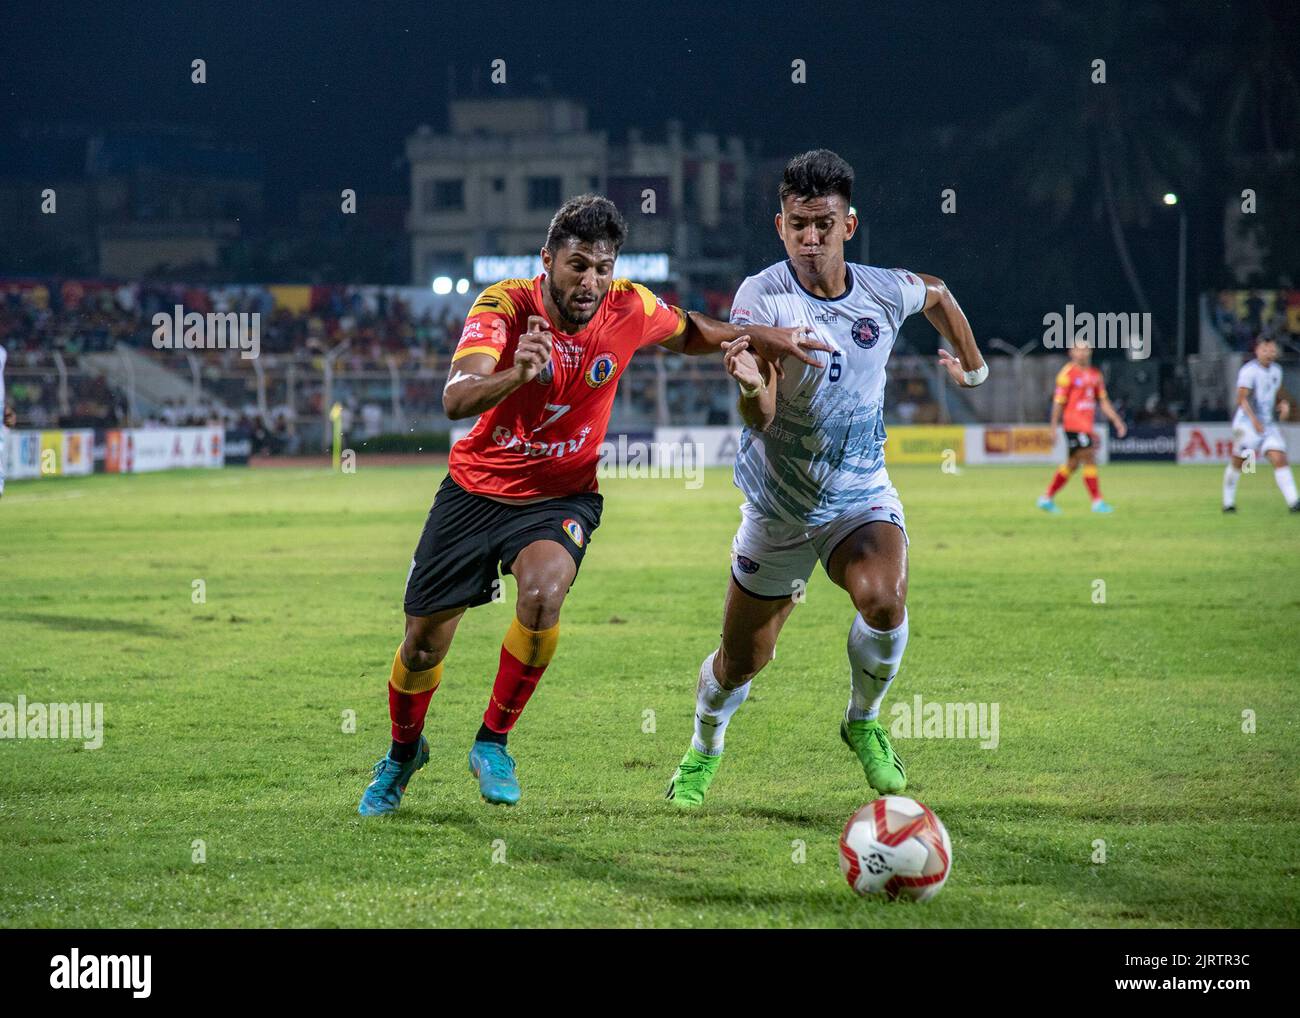 Emami East Bengal Football Club(EEBFC) and Rajasthan United Football Club(RUFC) played goal less draw in group B encounter of 131st Durand Cup match at KishorBharati Stadium, Jadavpur, Kolkata on 25th August,2022. (Photo by Amlan Biswas/Pacific Press) Stock Photo